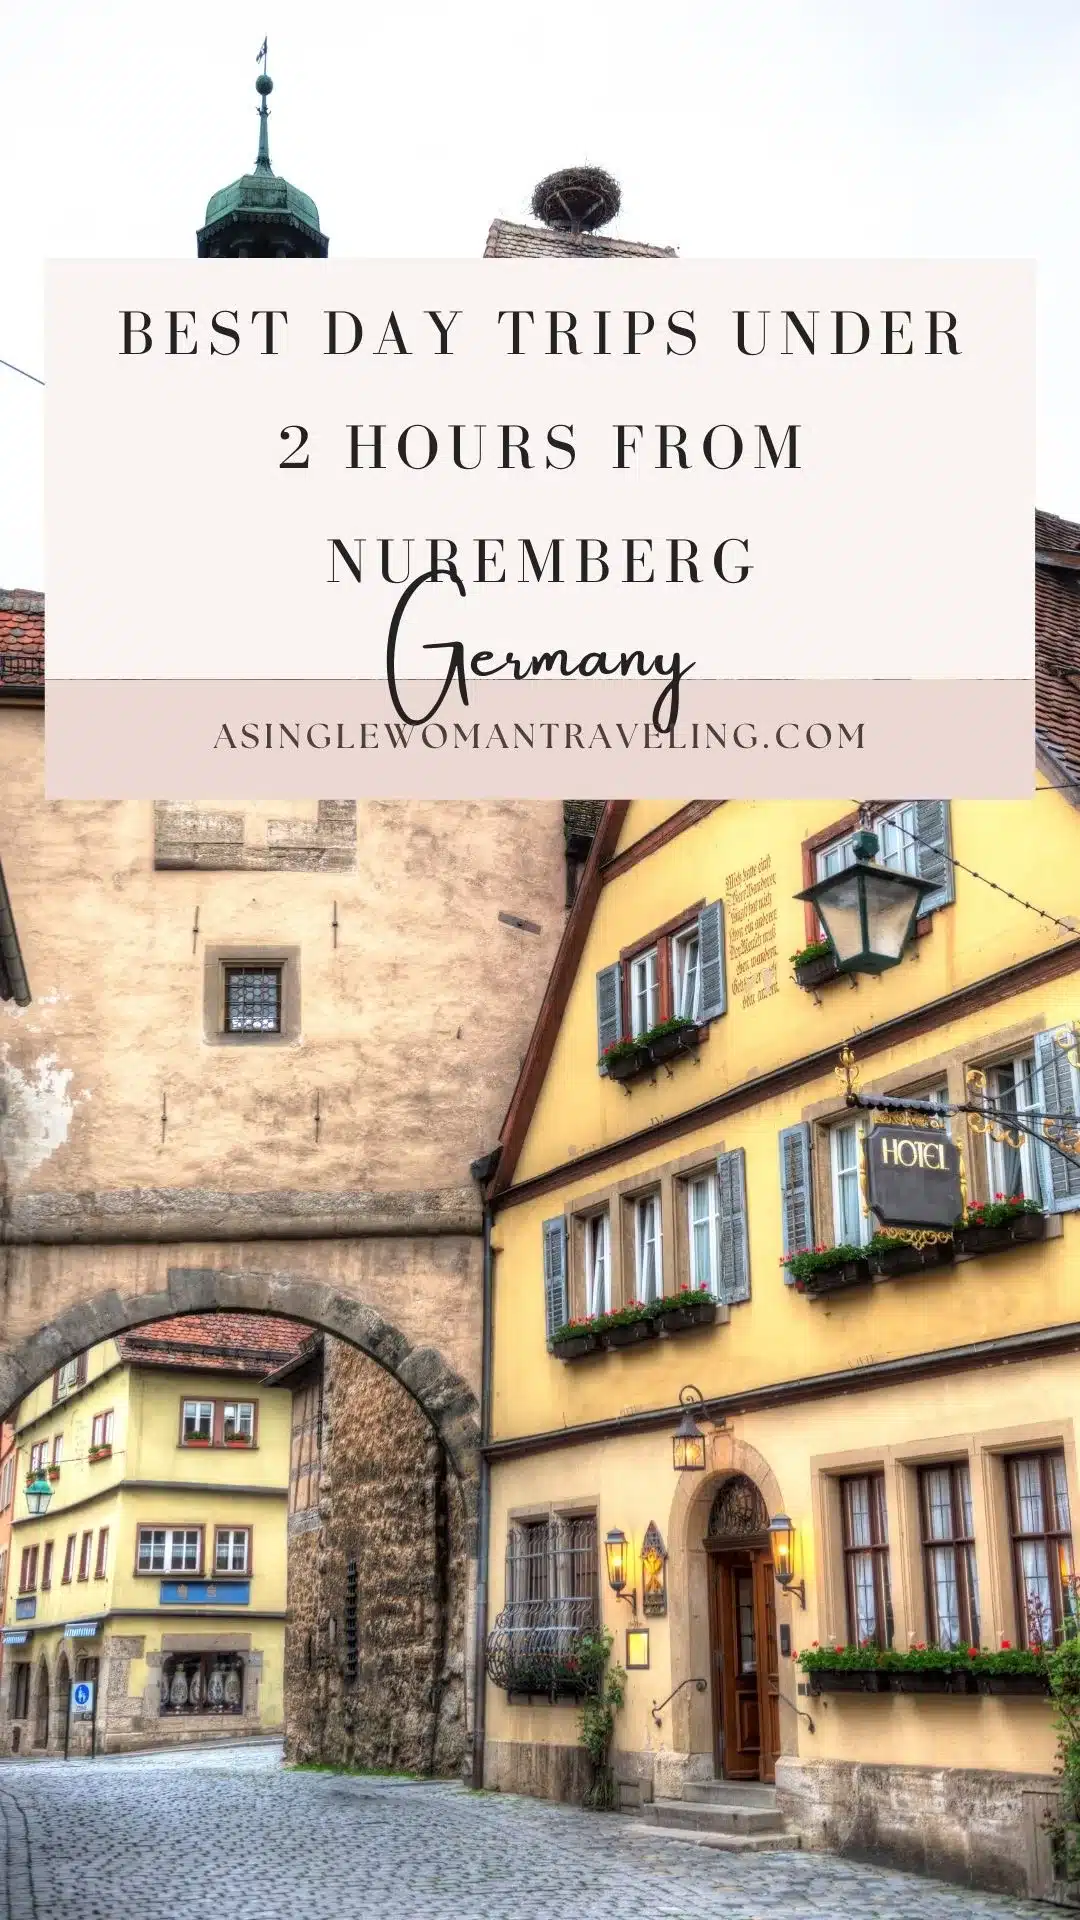 Day trips under 2 hours from Nuremberg